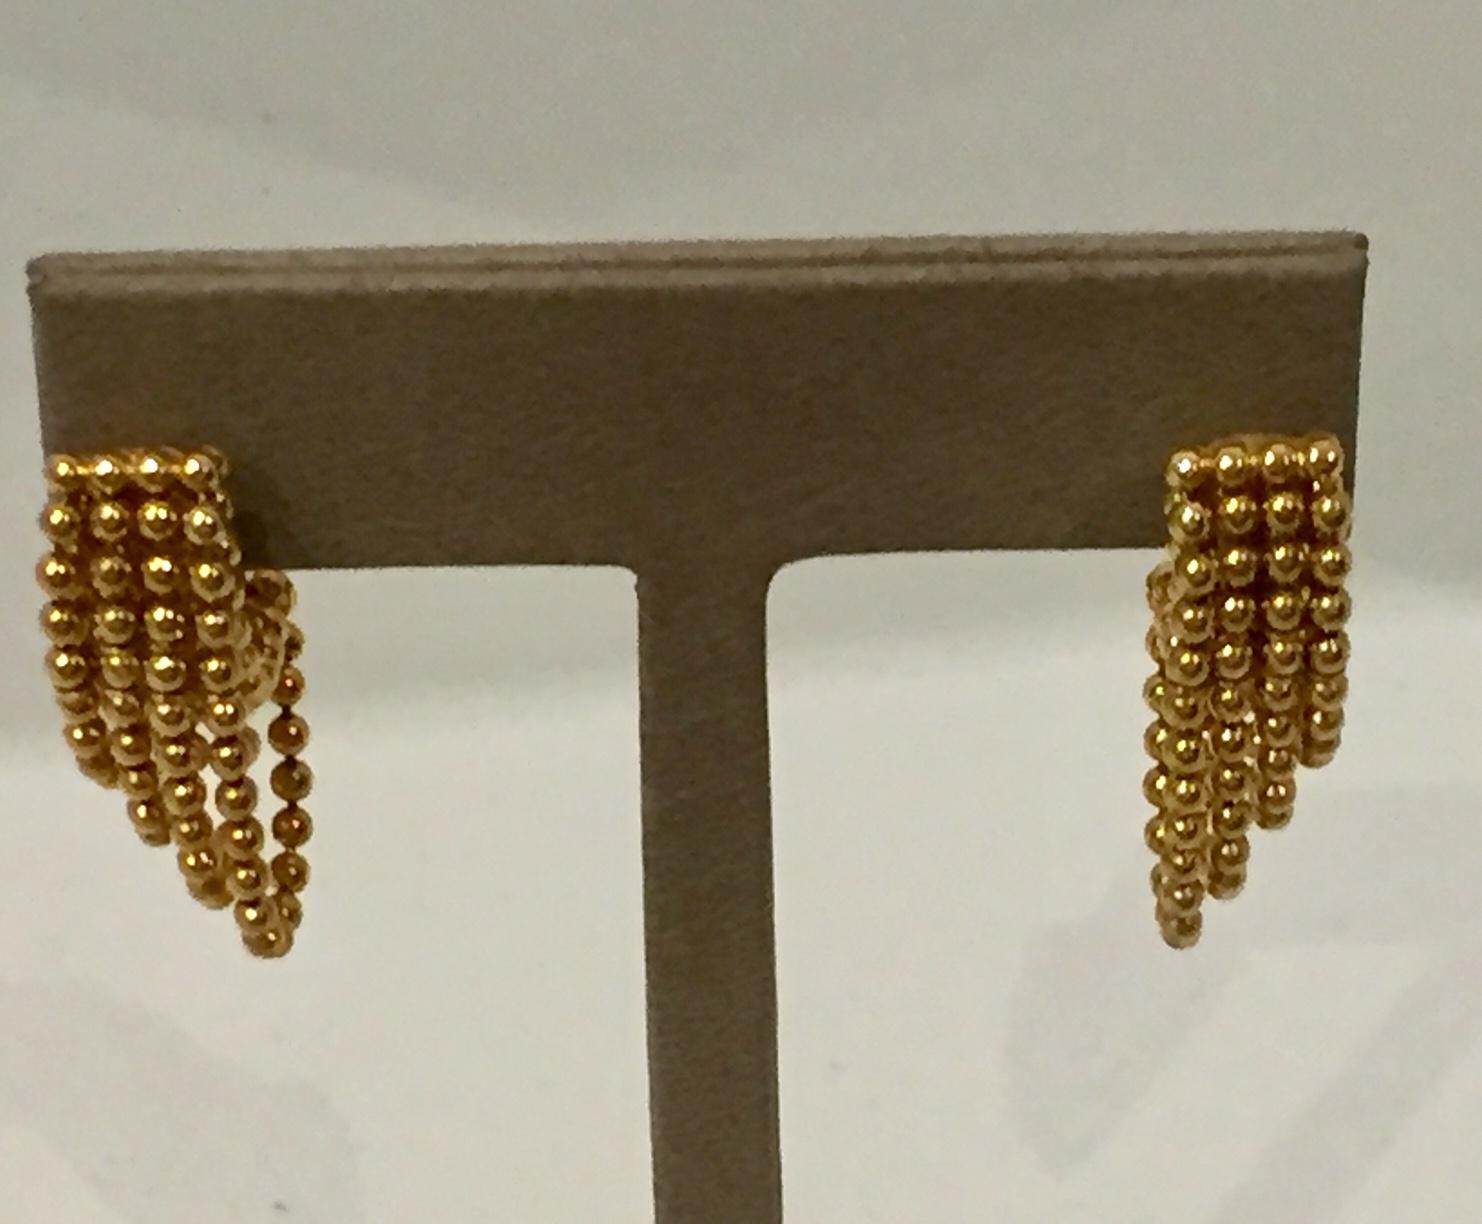 18K yellow gold Cartier Draperie earrings featuring metallic bead embellishments and omega back closures. 